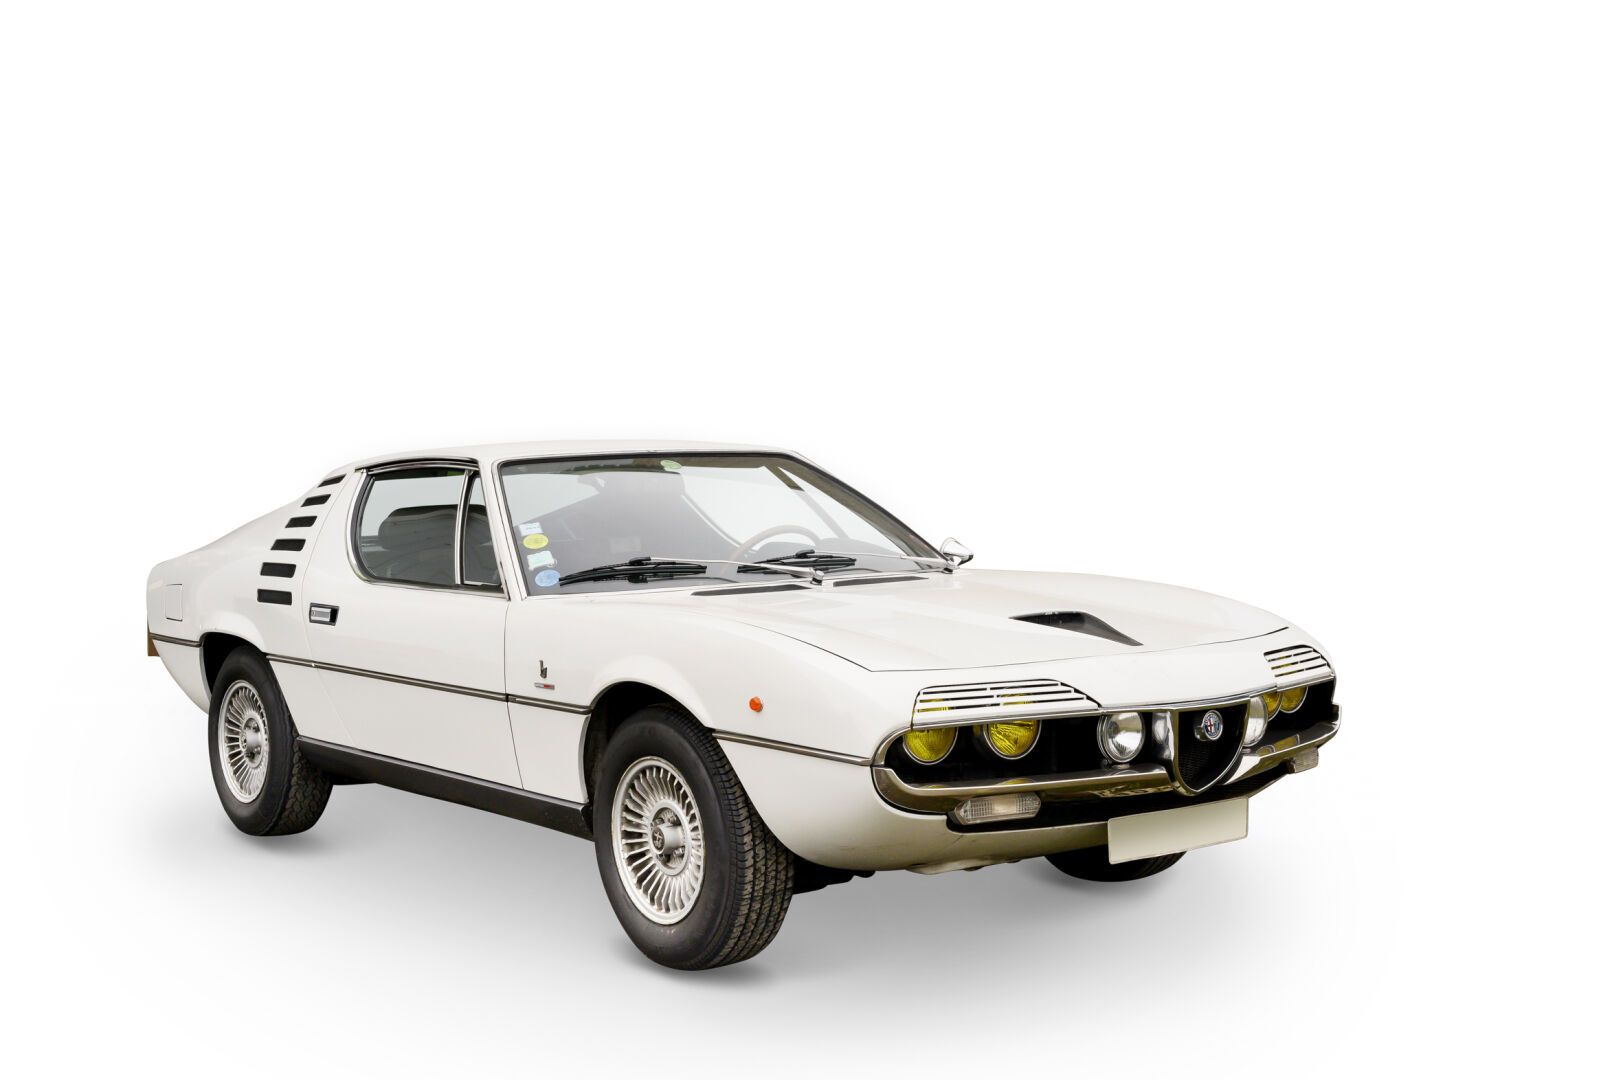 Null ALFA ROMEO MONTREAL
1972

Type : 10564
Chassis number : 1426725
Engine numb&hellip;